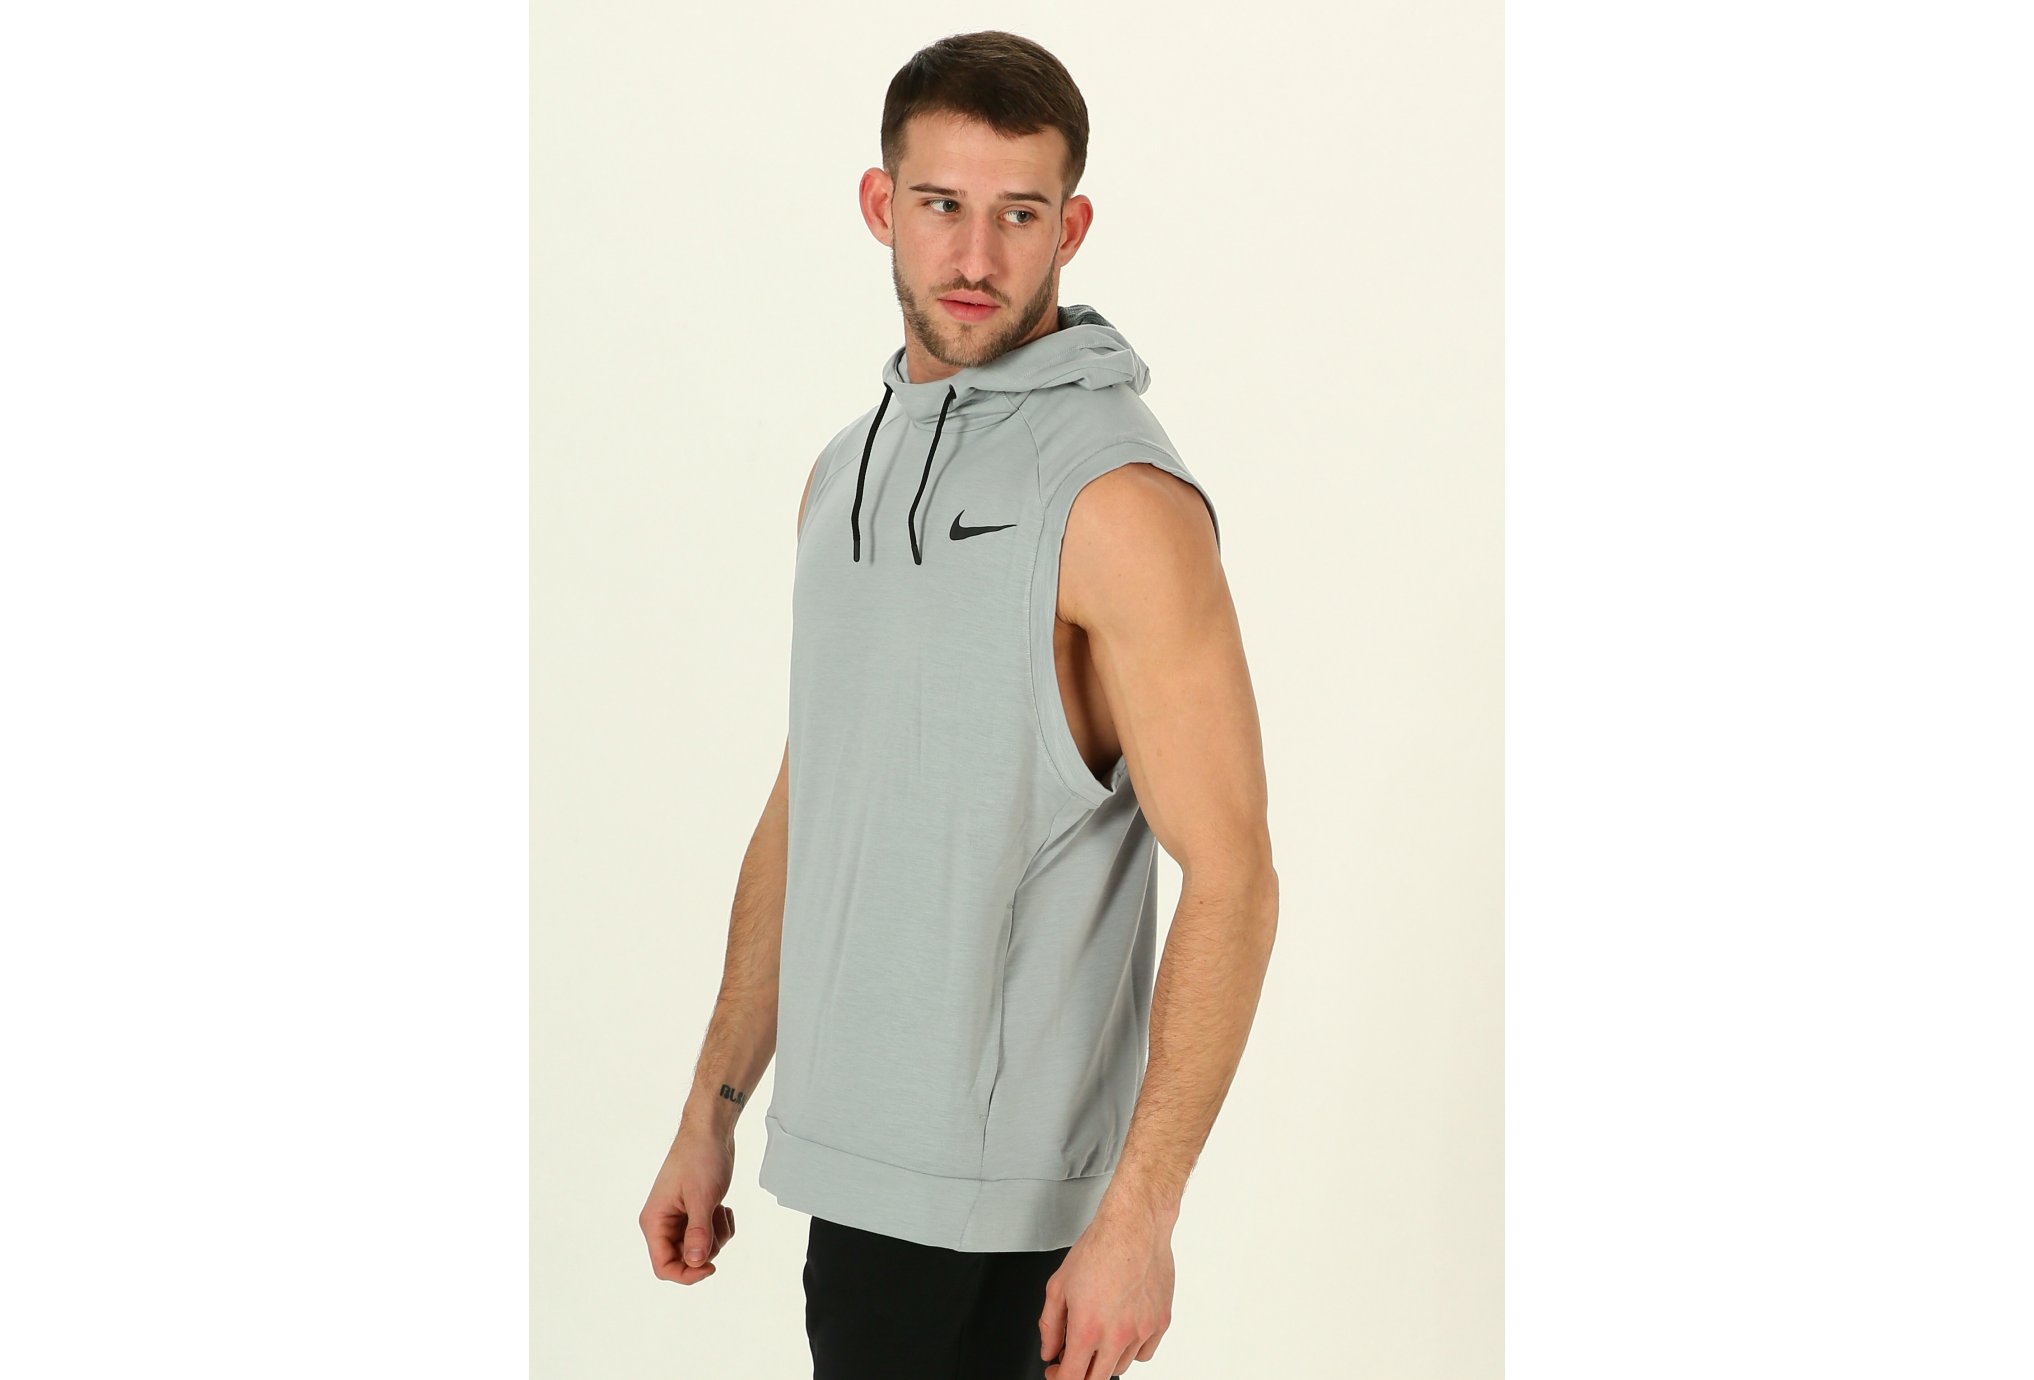 Nike Dry hoodie m dittique vtements homme